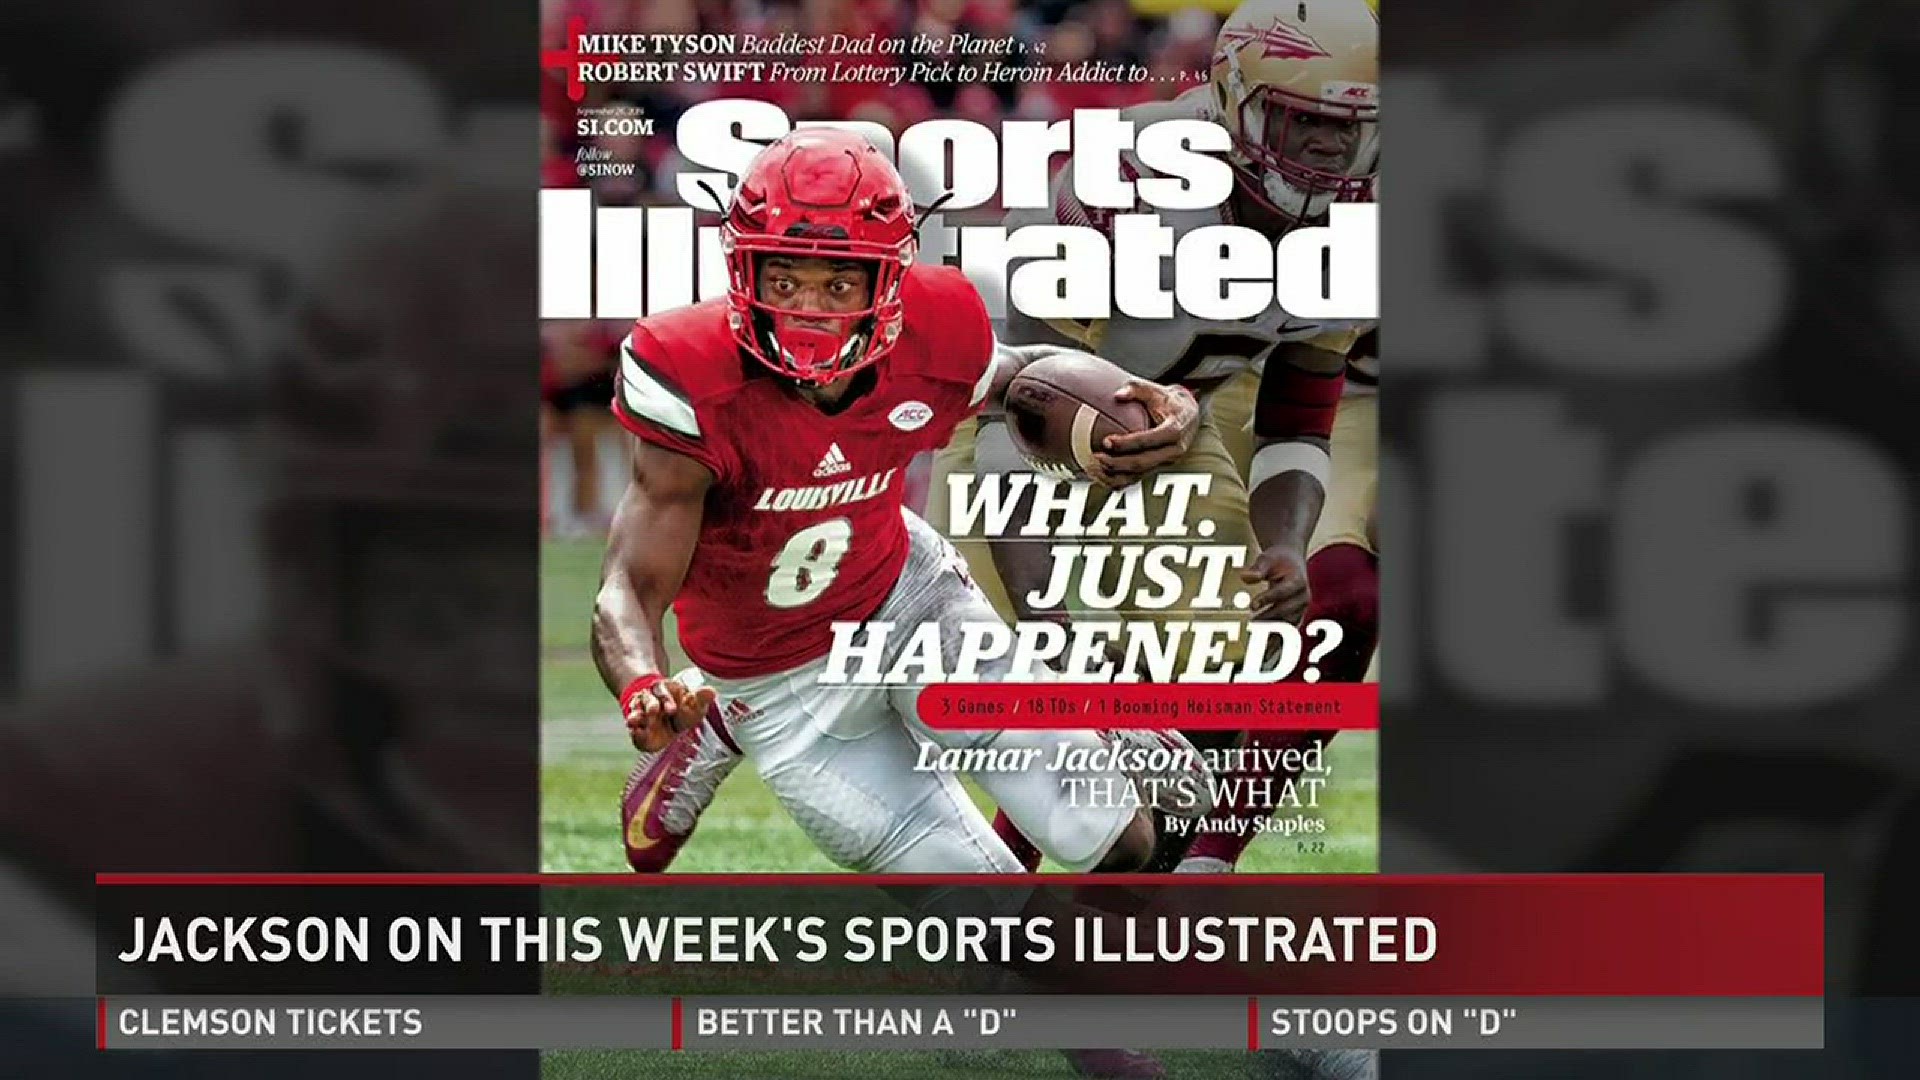 Lamar Jackson featured on latest Sports Illustrated cover